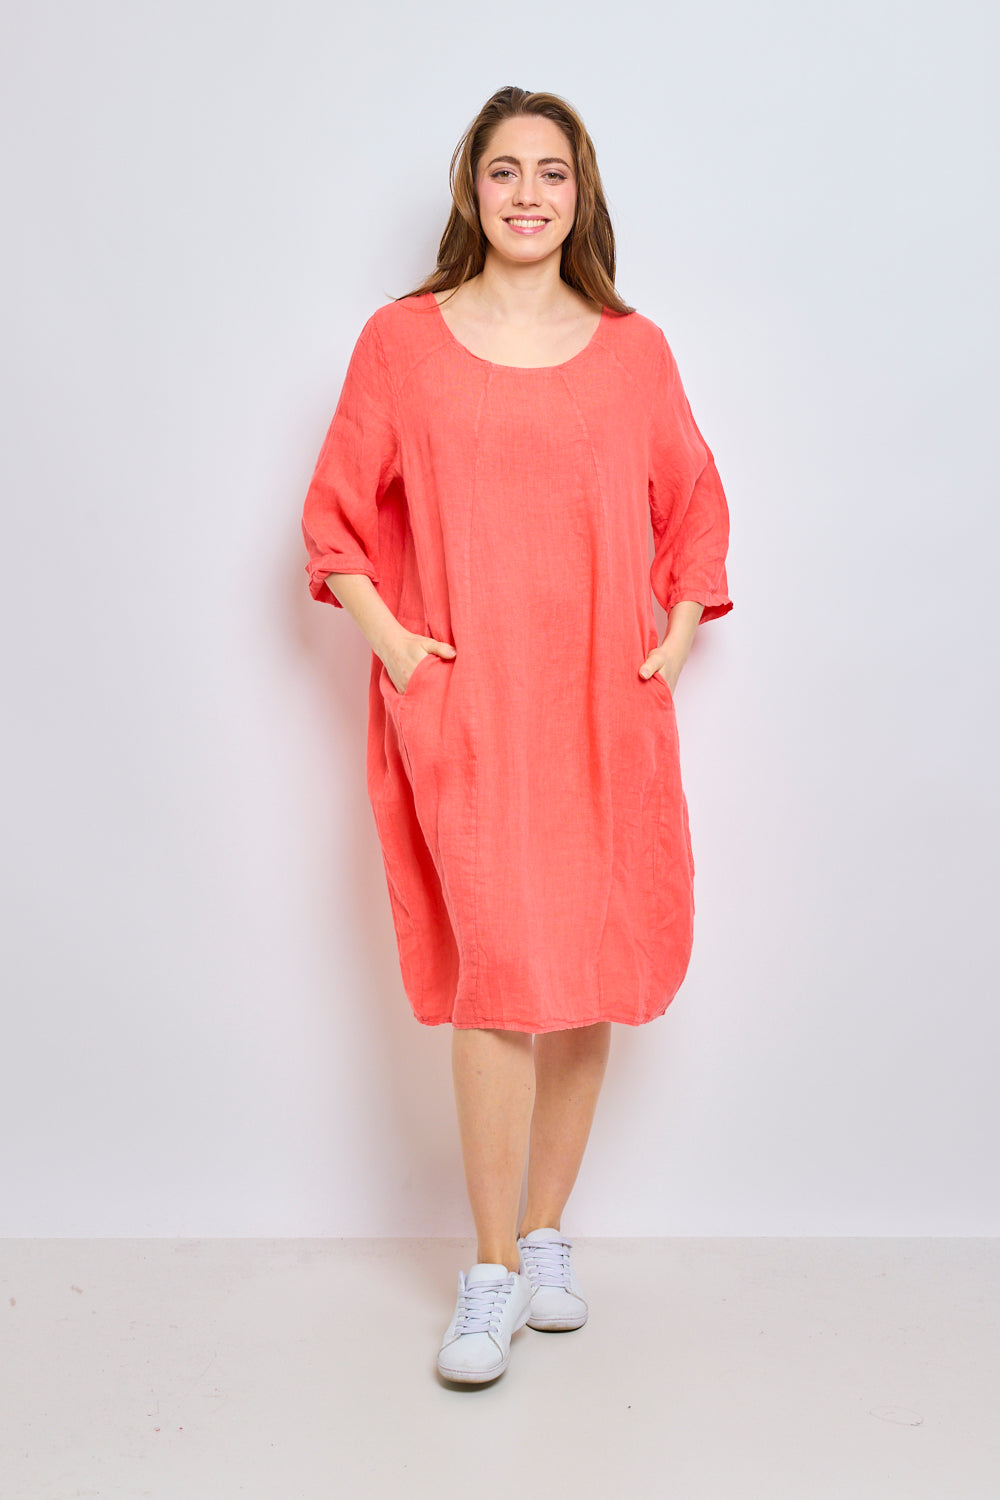 Linen dress with rounded collar